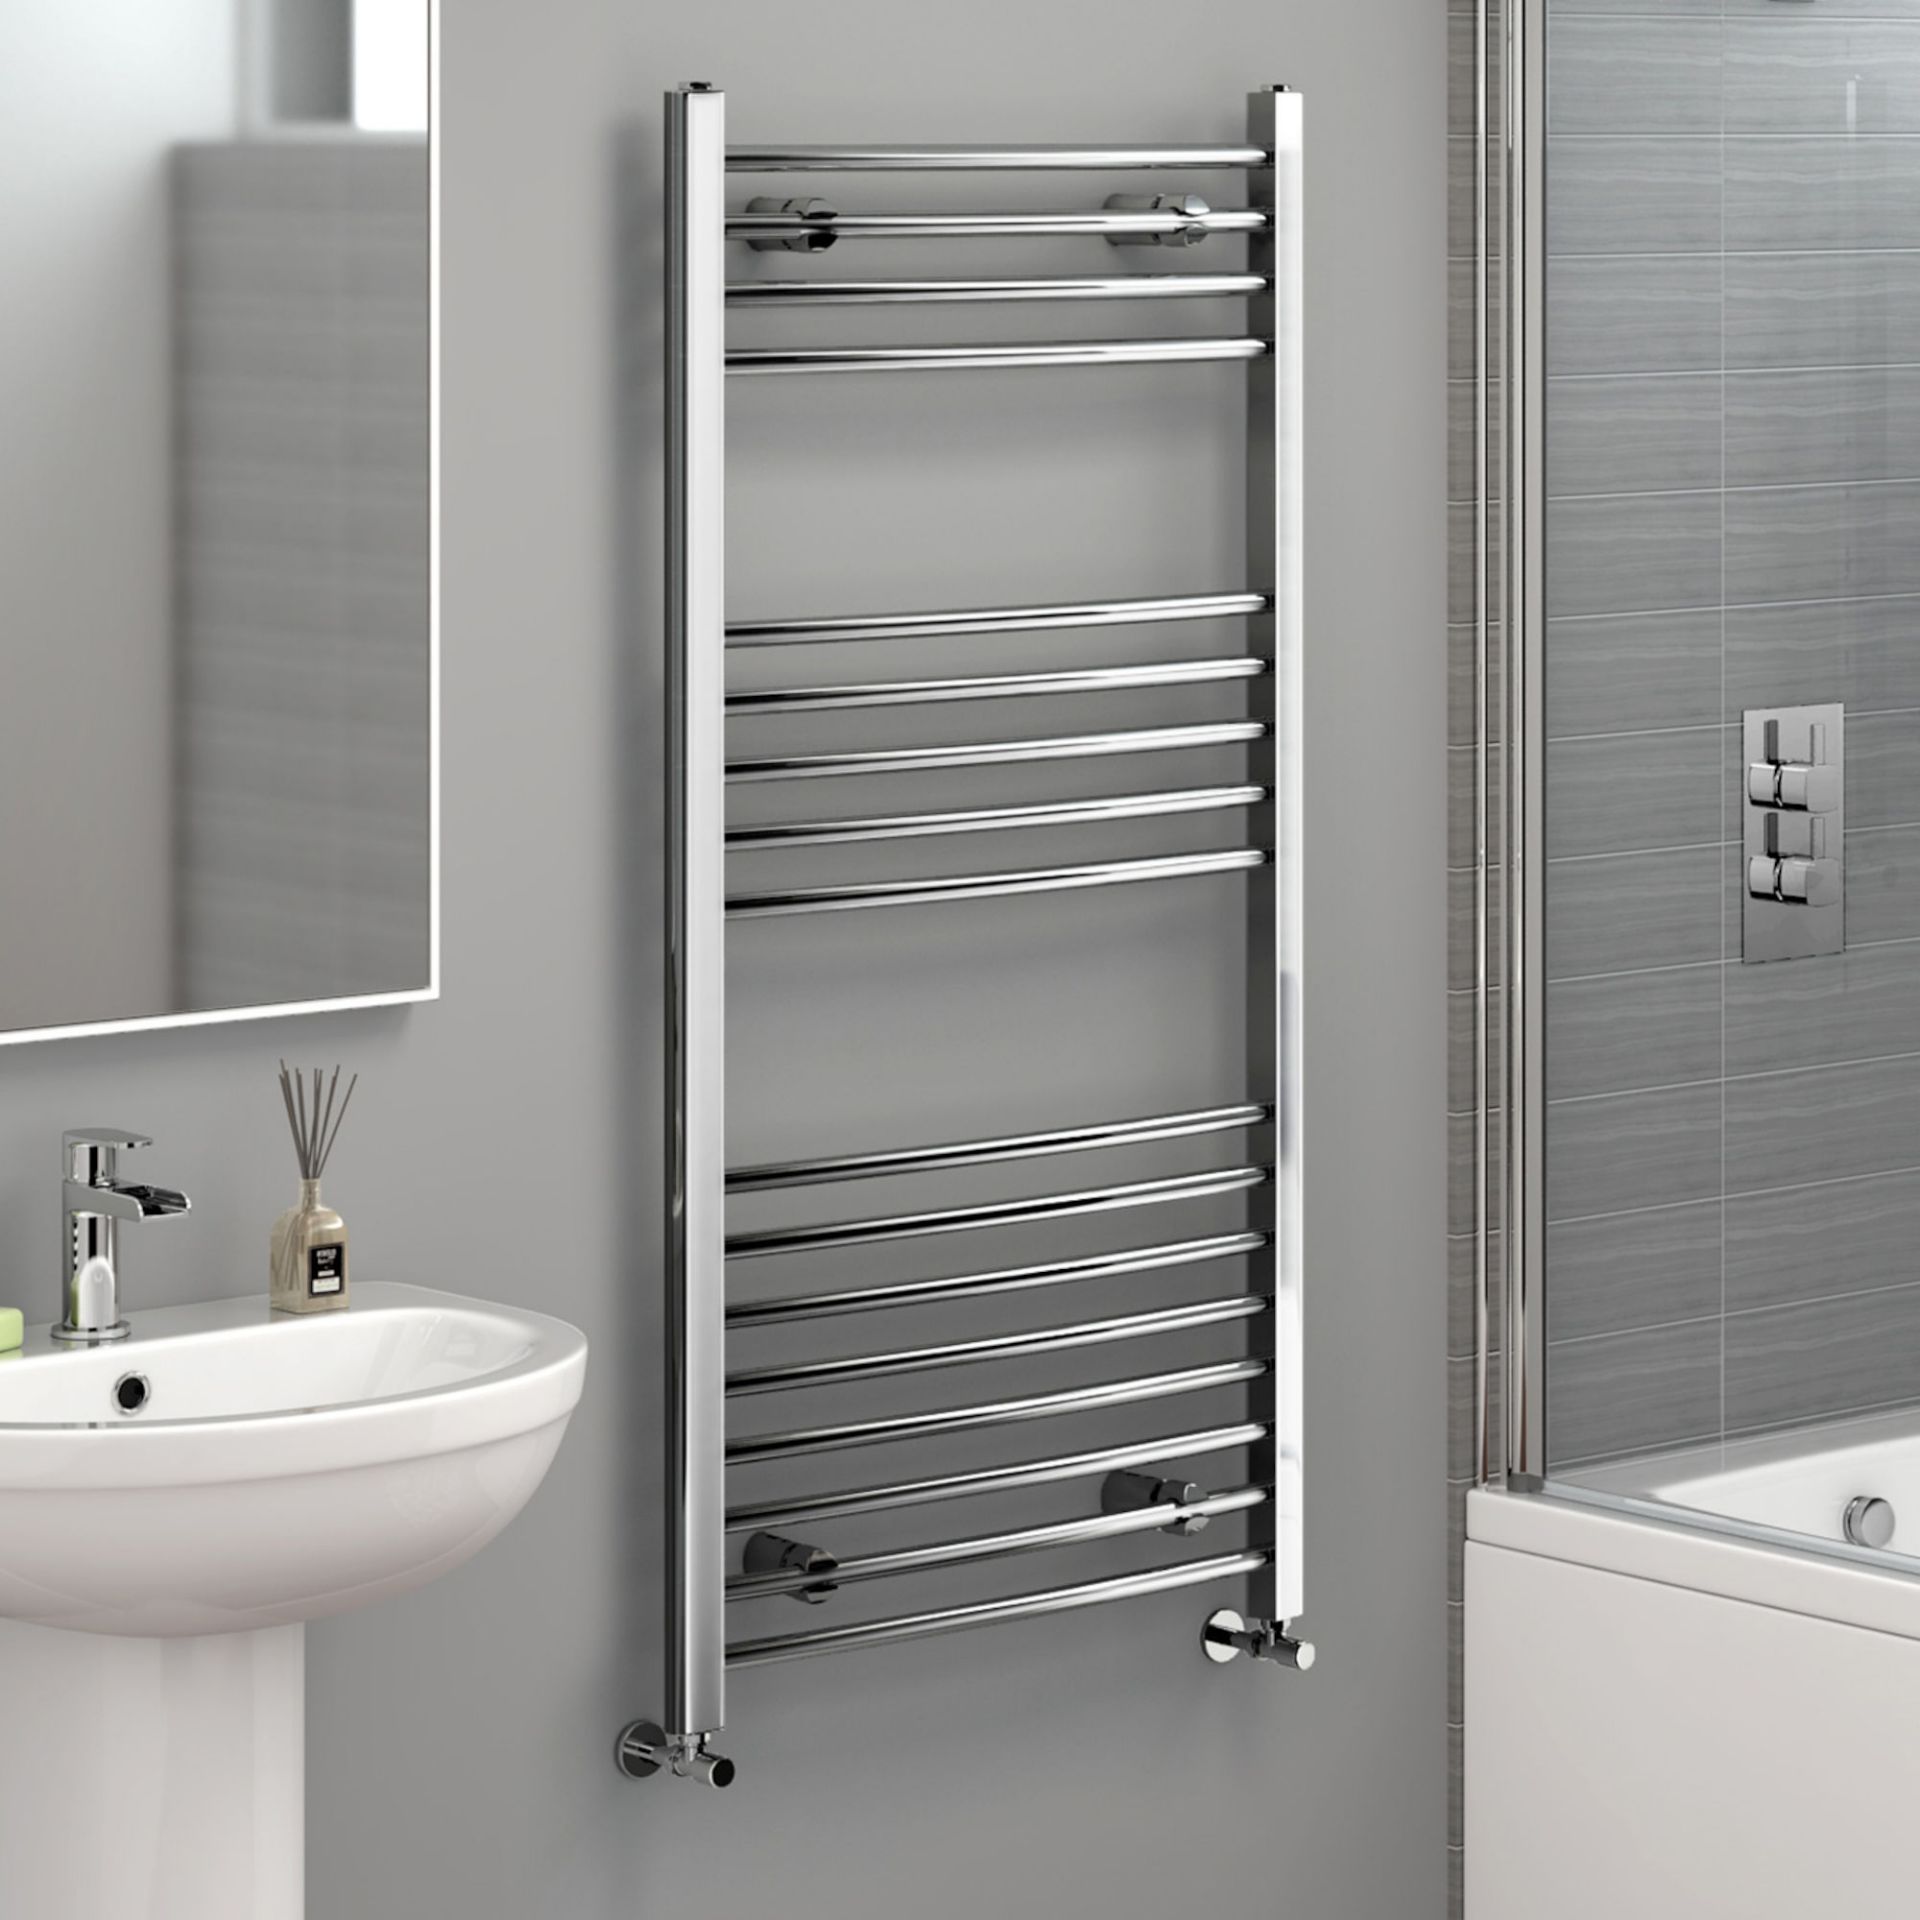 New 1200x600mm - 20mm Tubes - Chrome Curved Rail Ladder Towel Radiator.Nc1200600.Made From Chro...